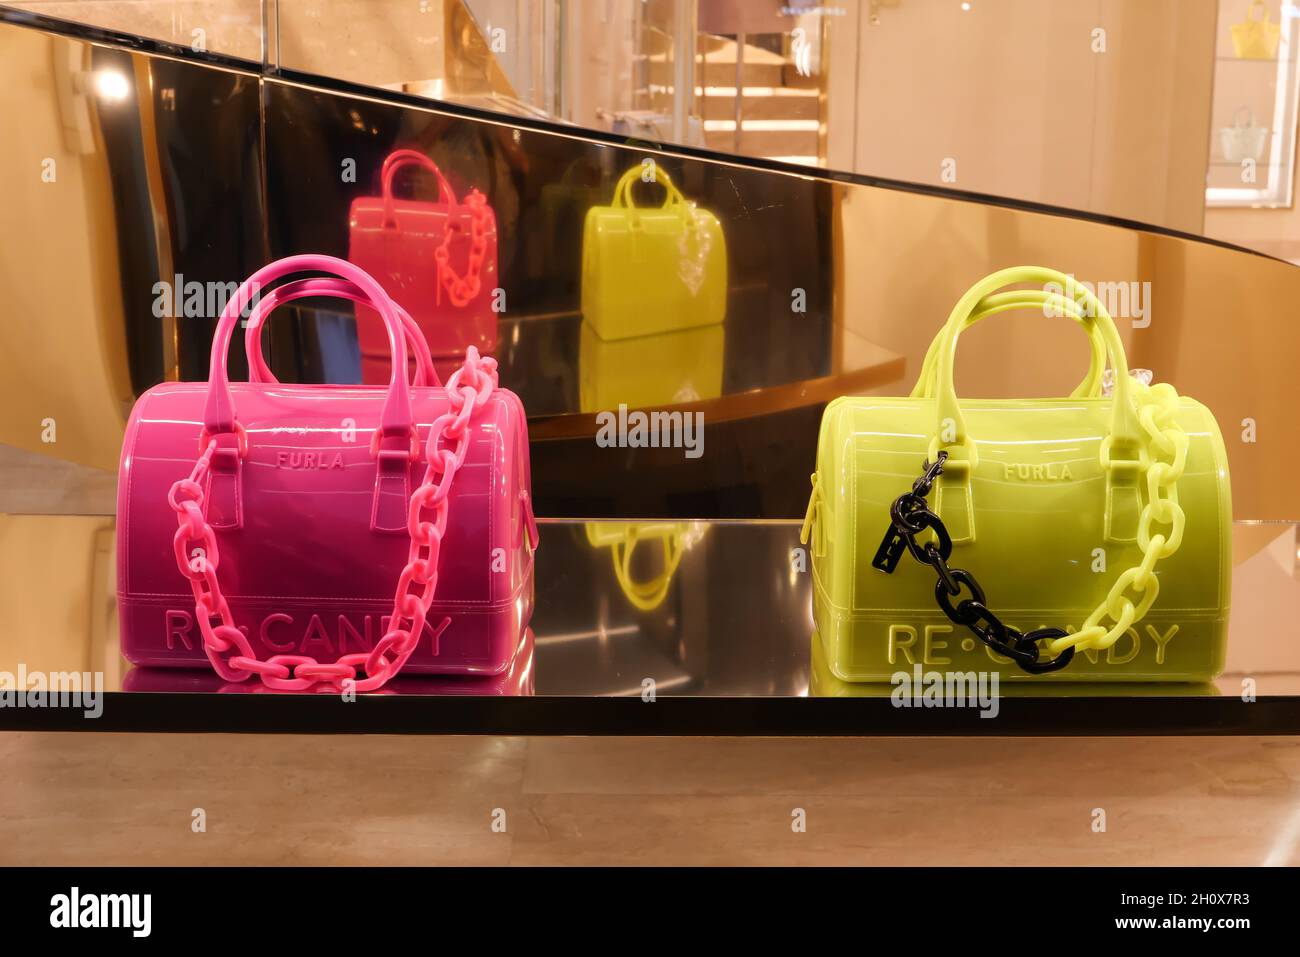 RE CANDY BAGS ON DISPLAY AT FURLA FASHION BOUTIQUE Stock Photo - Alamy